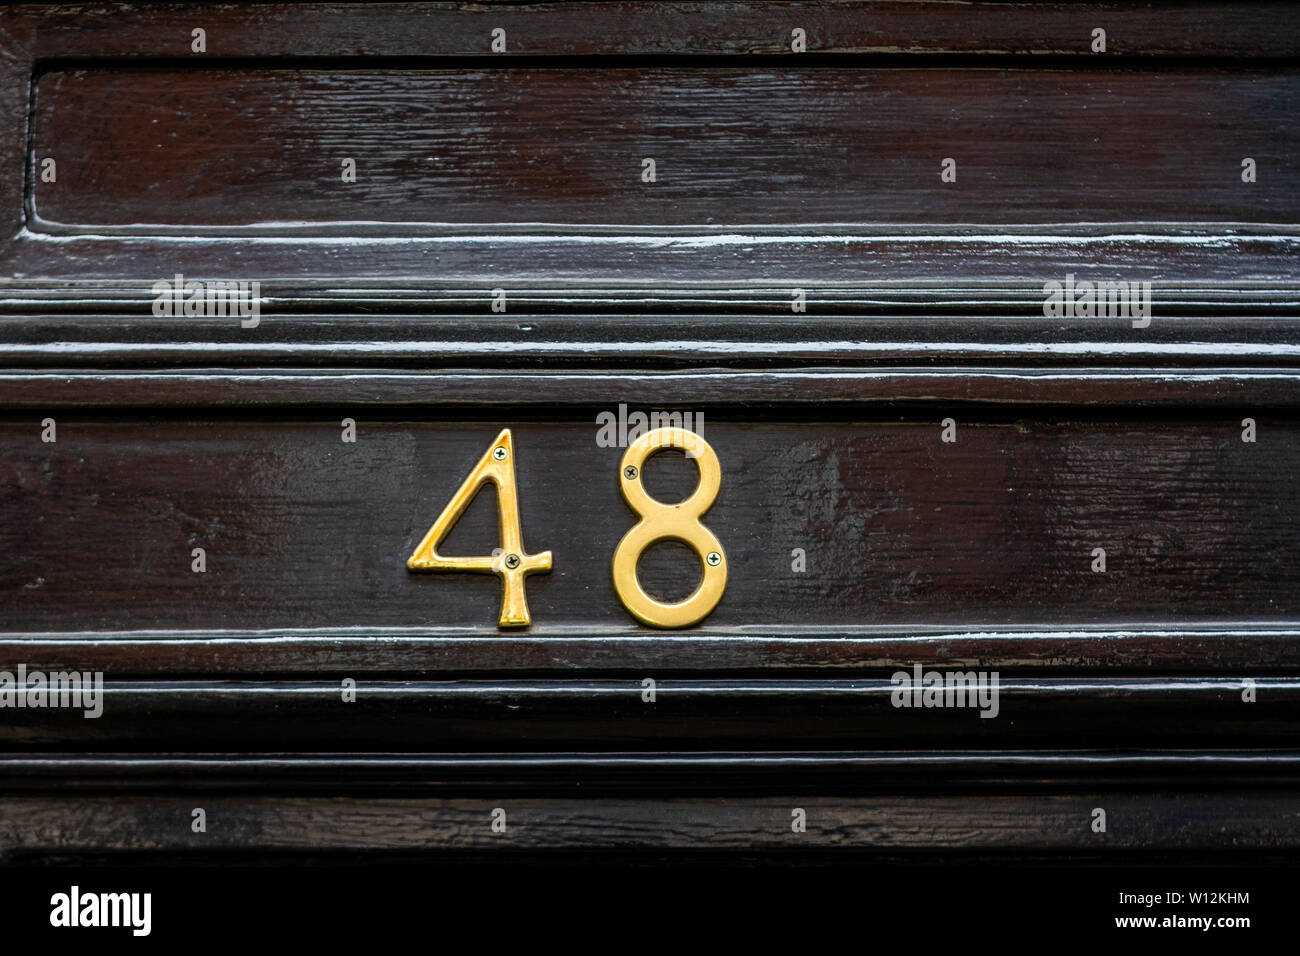 House number 48 with the forty-eight in metal digits on a black painted old wooden front door Stock Photo